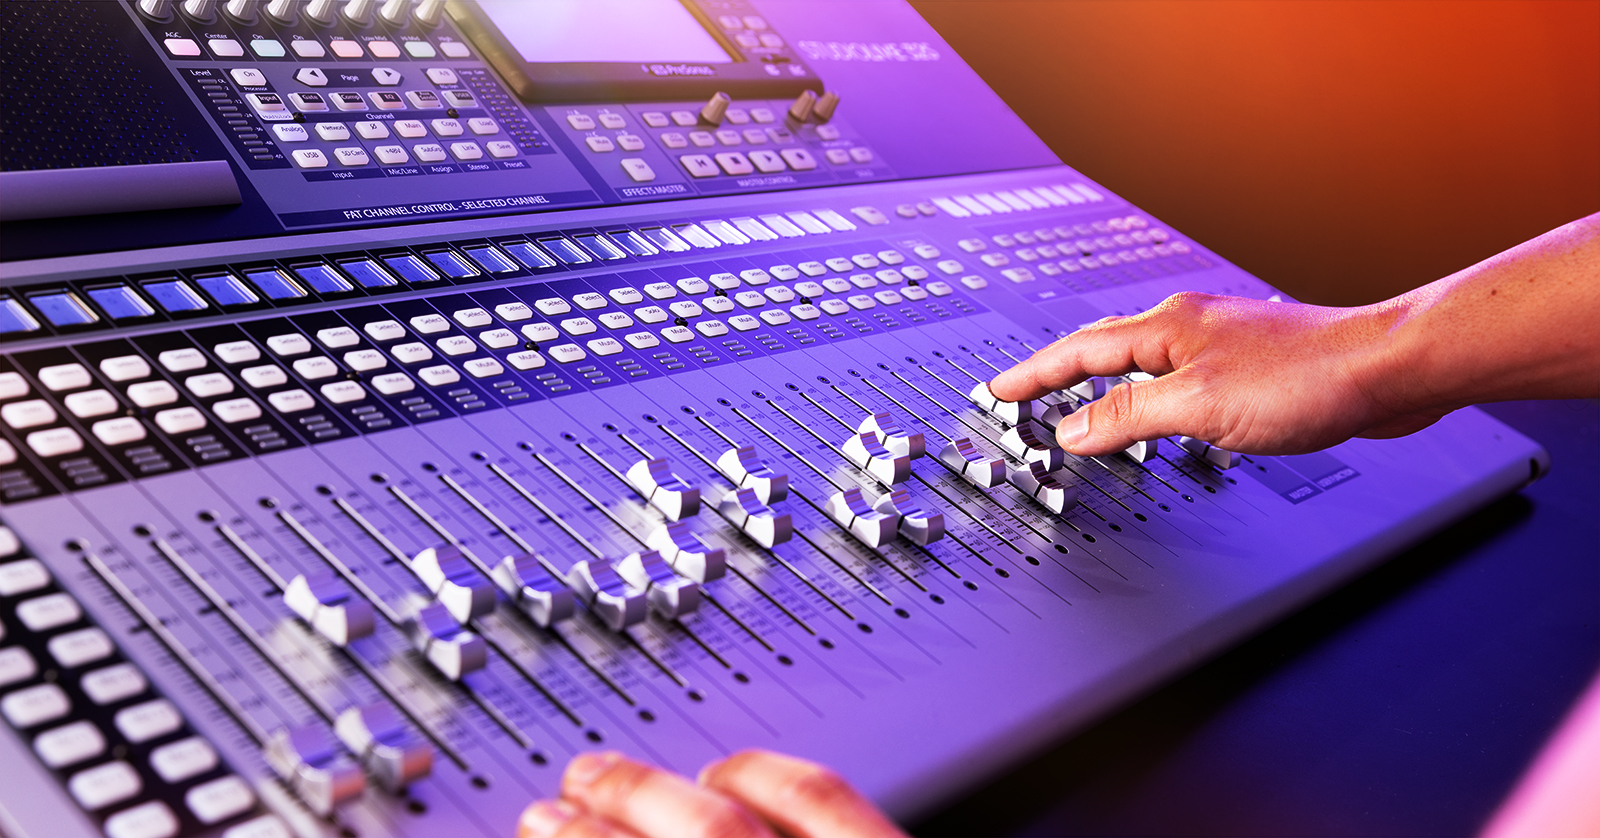 Find Your Perfect Sound With Our 6 Of The Best: Small Mixers